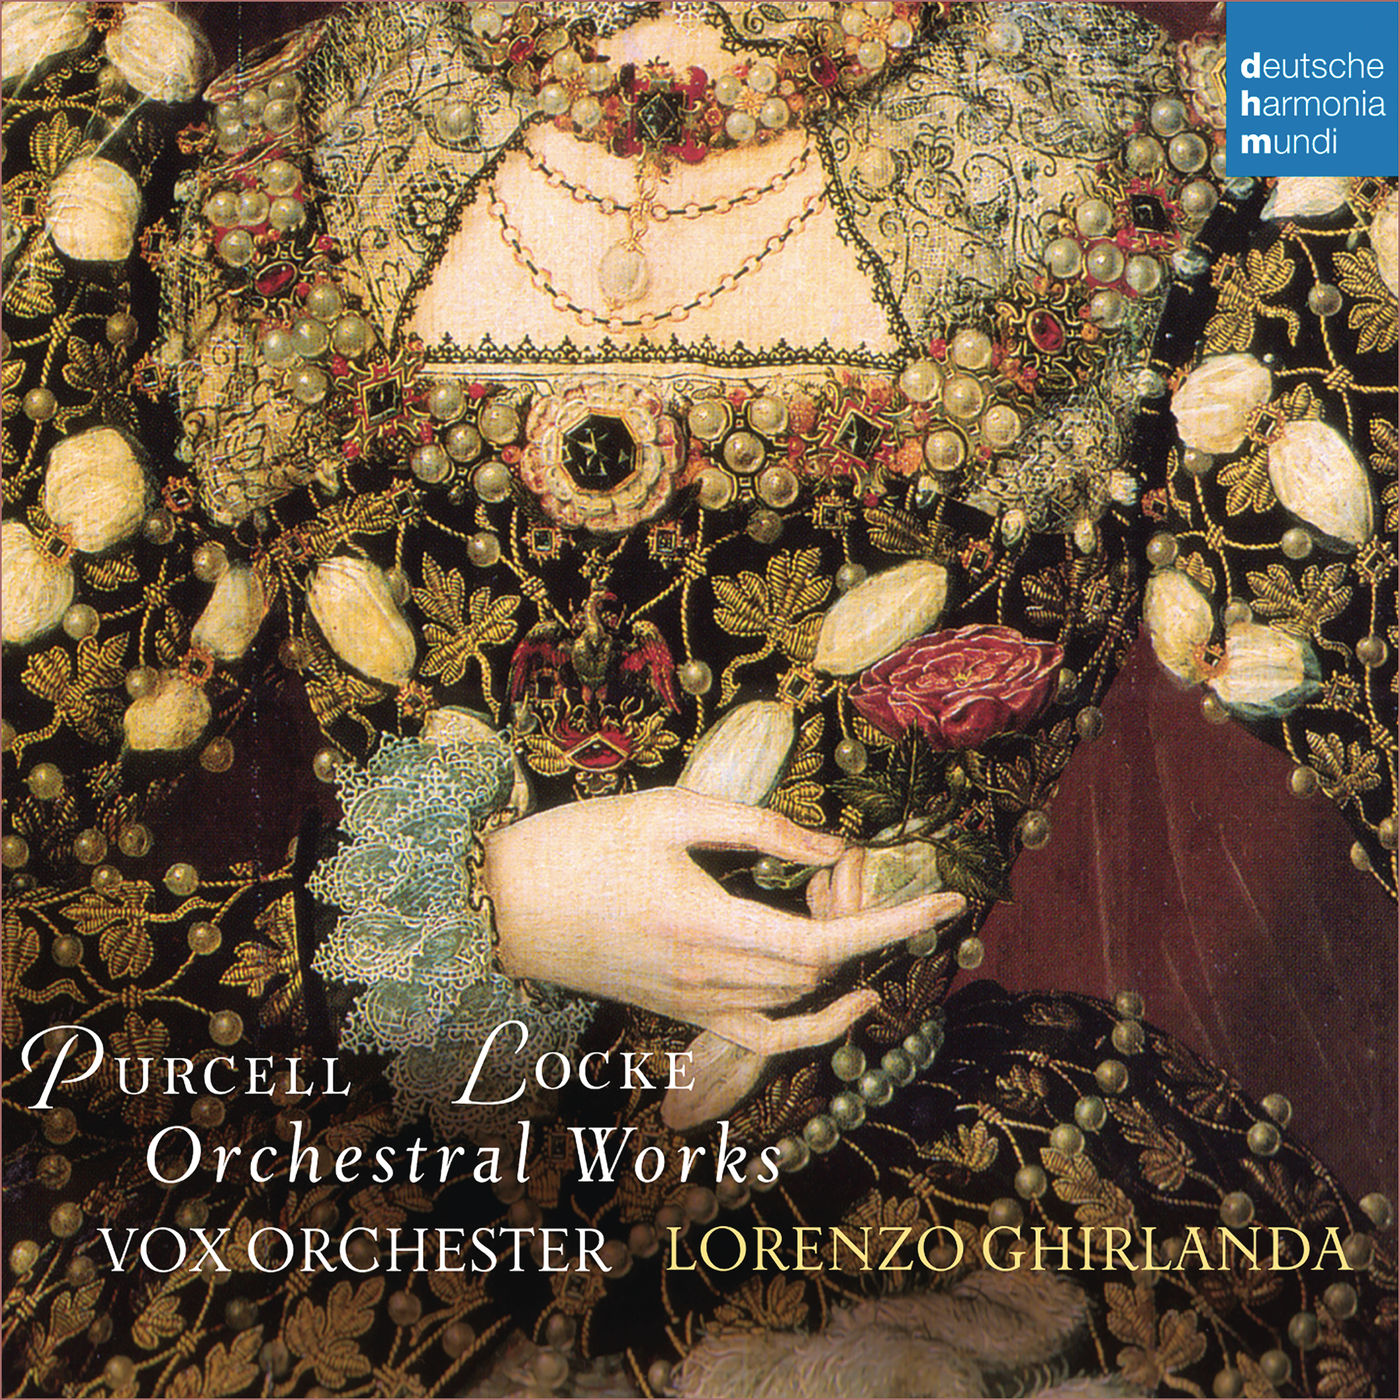 Vox Orchester – Purcell & Locke: Orchestral Works (2019) [FLAC 24bit/96kHz]